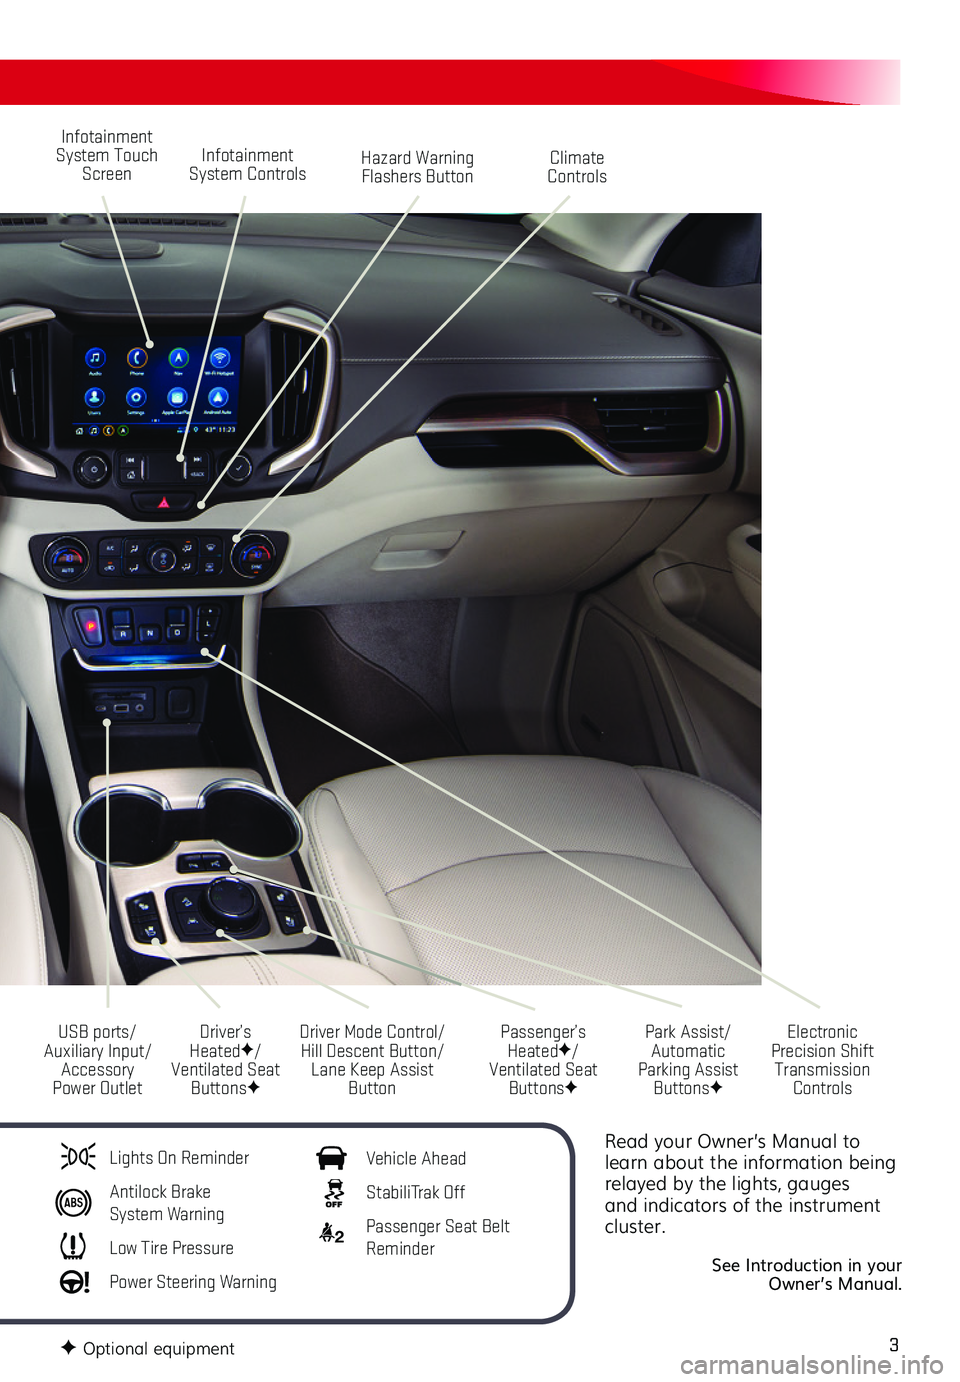 GMC TERRAIN 2021  Get To Know Guide 3
Read your Owner’s Manual to learn about the information being relayed by the lights, gauges and indicators of the instrument cluster.
See Introduction in your  Owner’s Manual.
Infotainment Syste